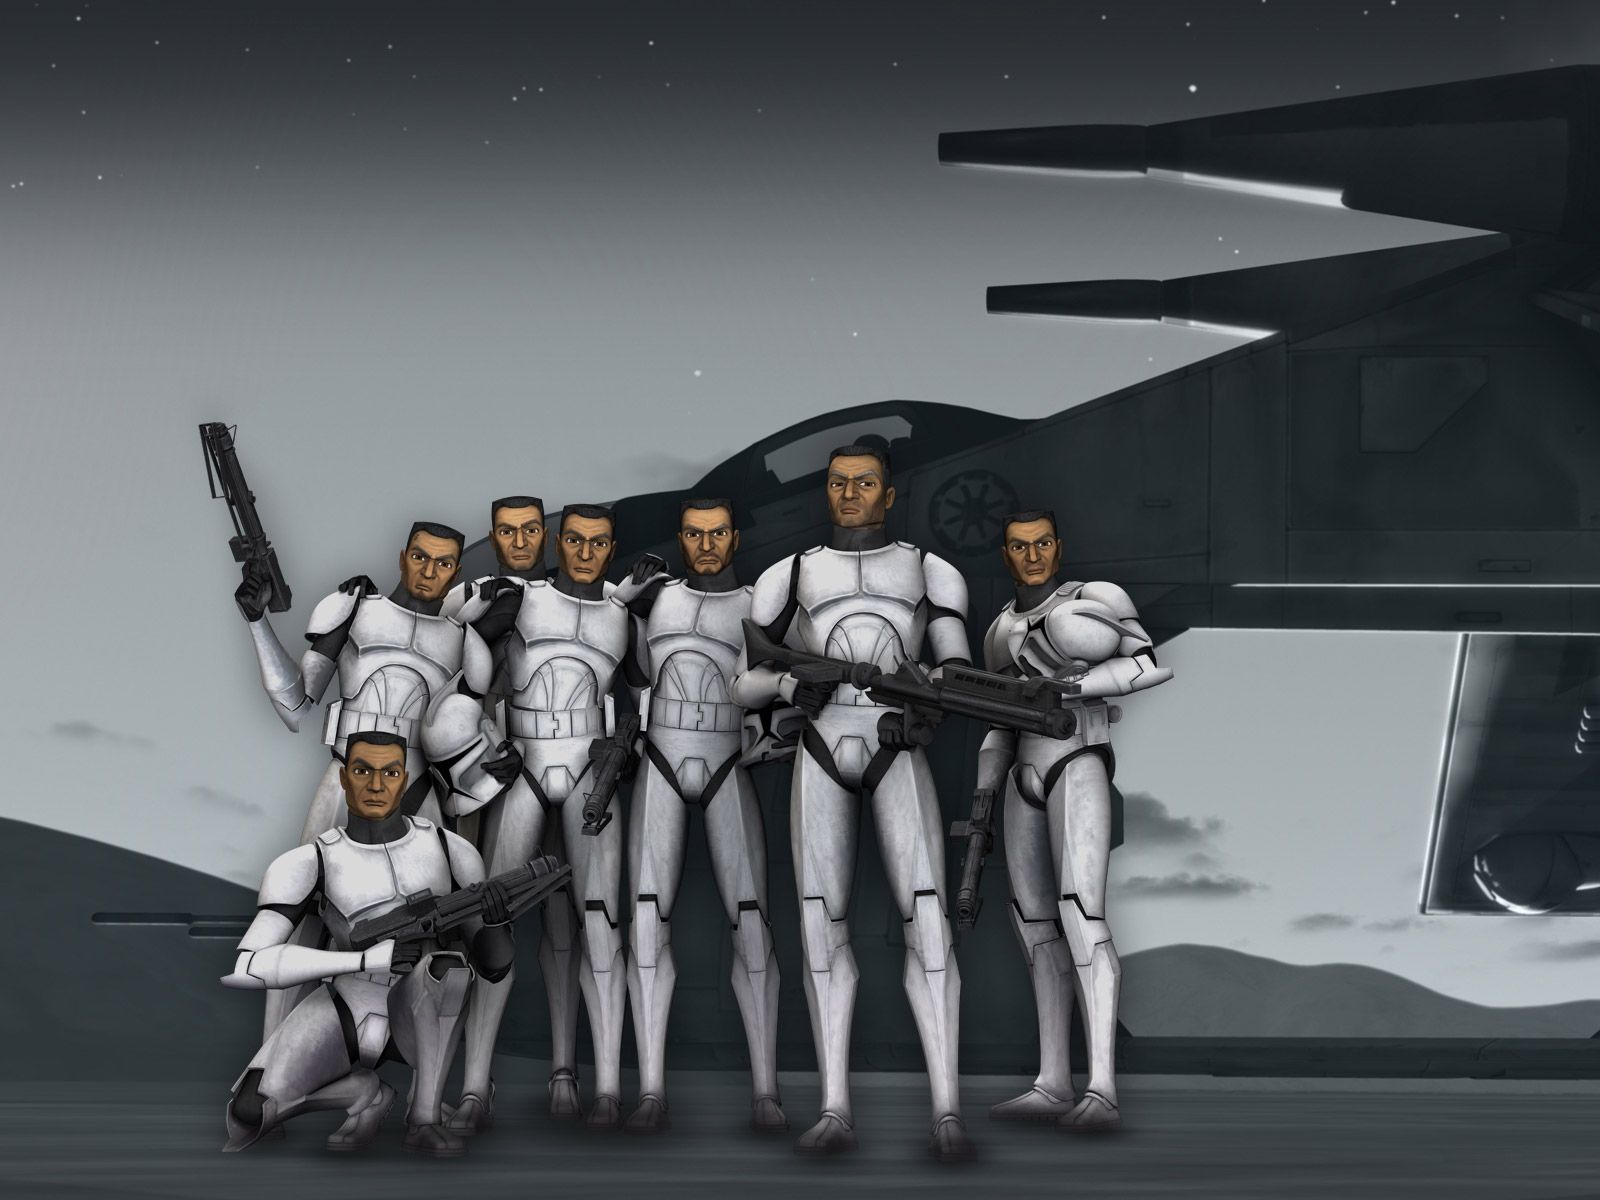 Heavy, Echo, Fives, and the 501st legion. Star wars clone wars, Star wars image, Clone wars